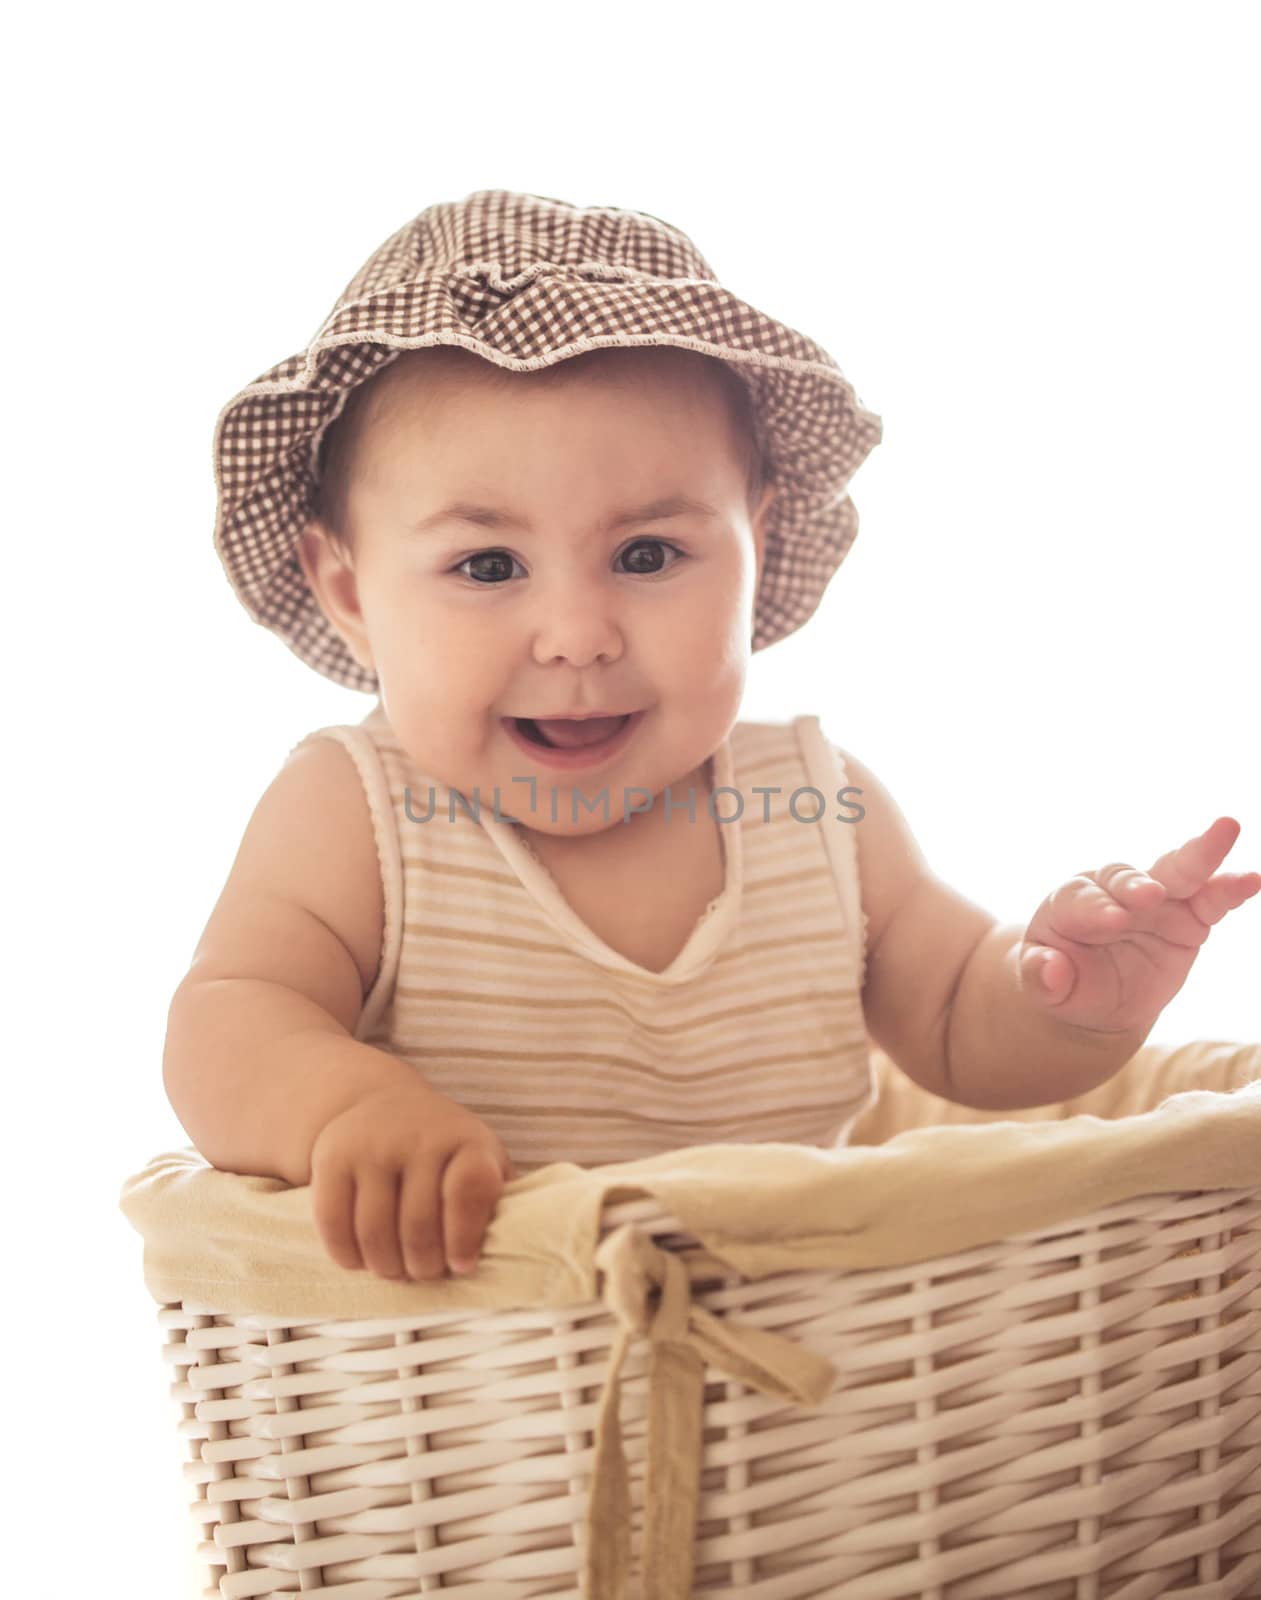 Eight month baby girl play with laundry basket, isolated on white